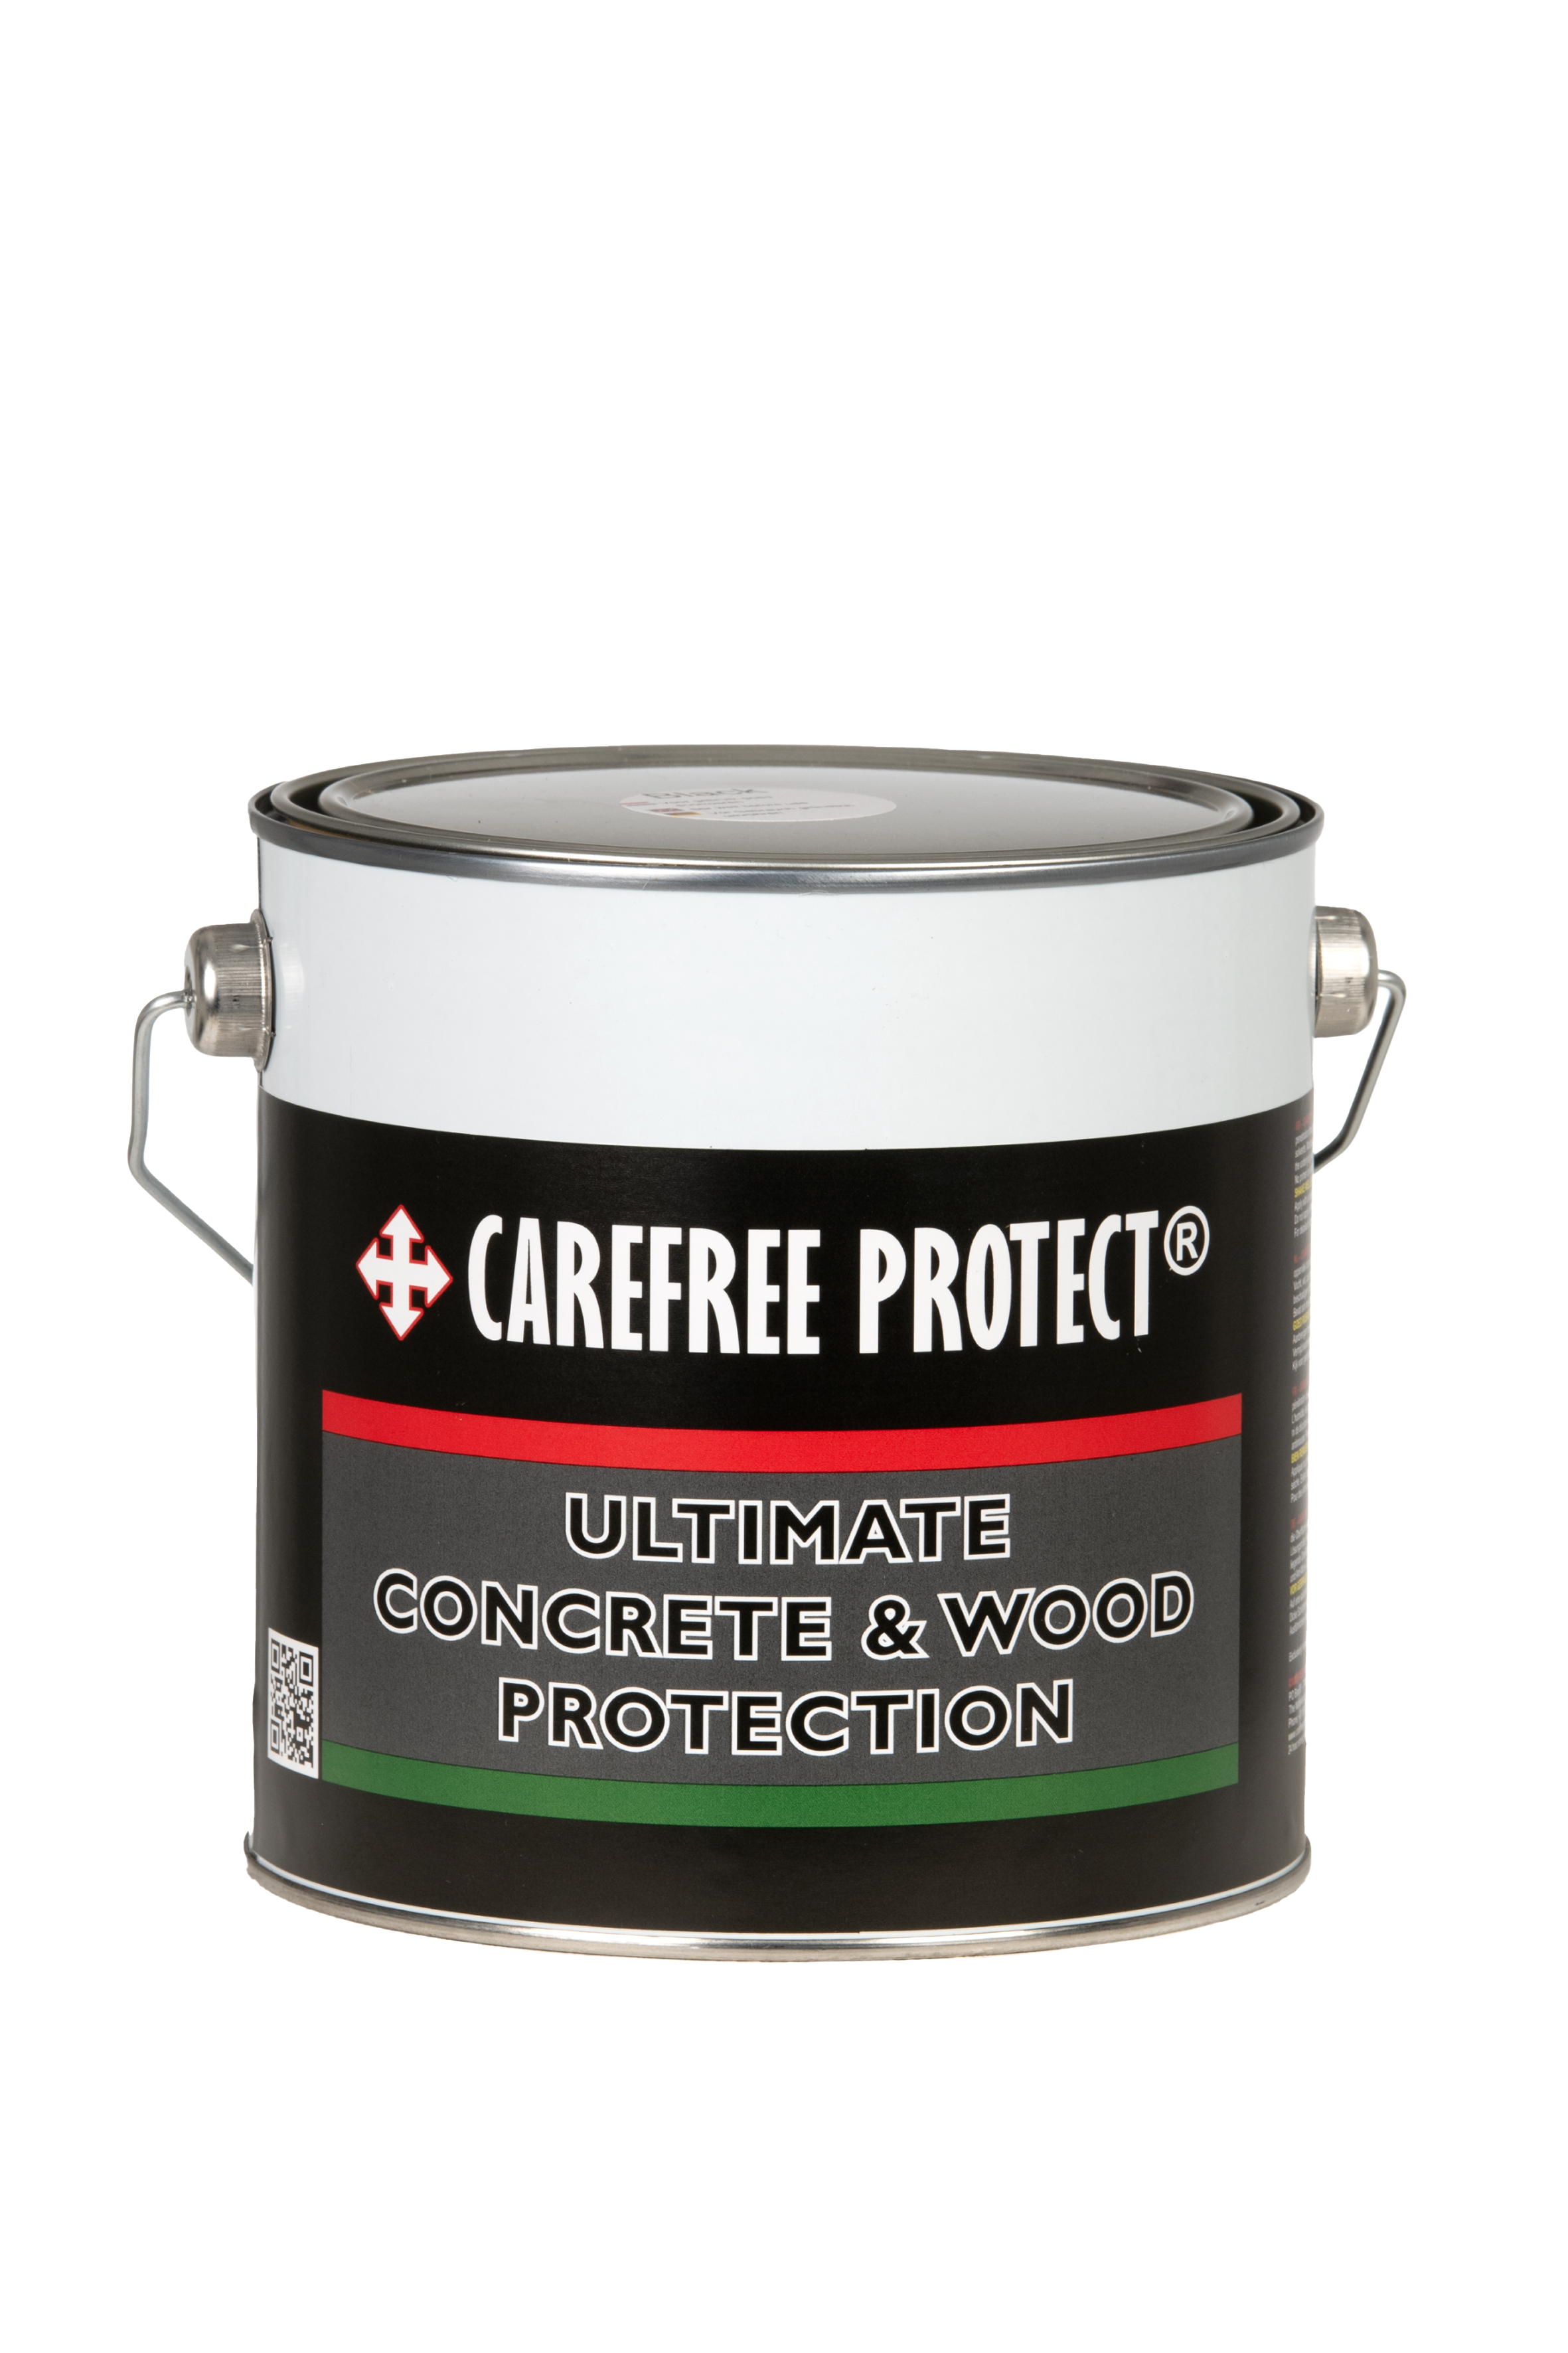 Carefree Protect® douglas wood stain 2.5ltr